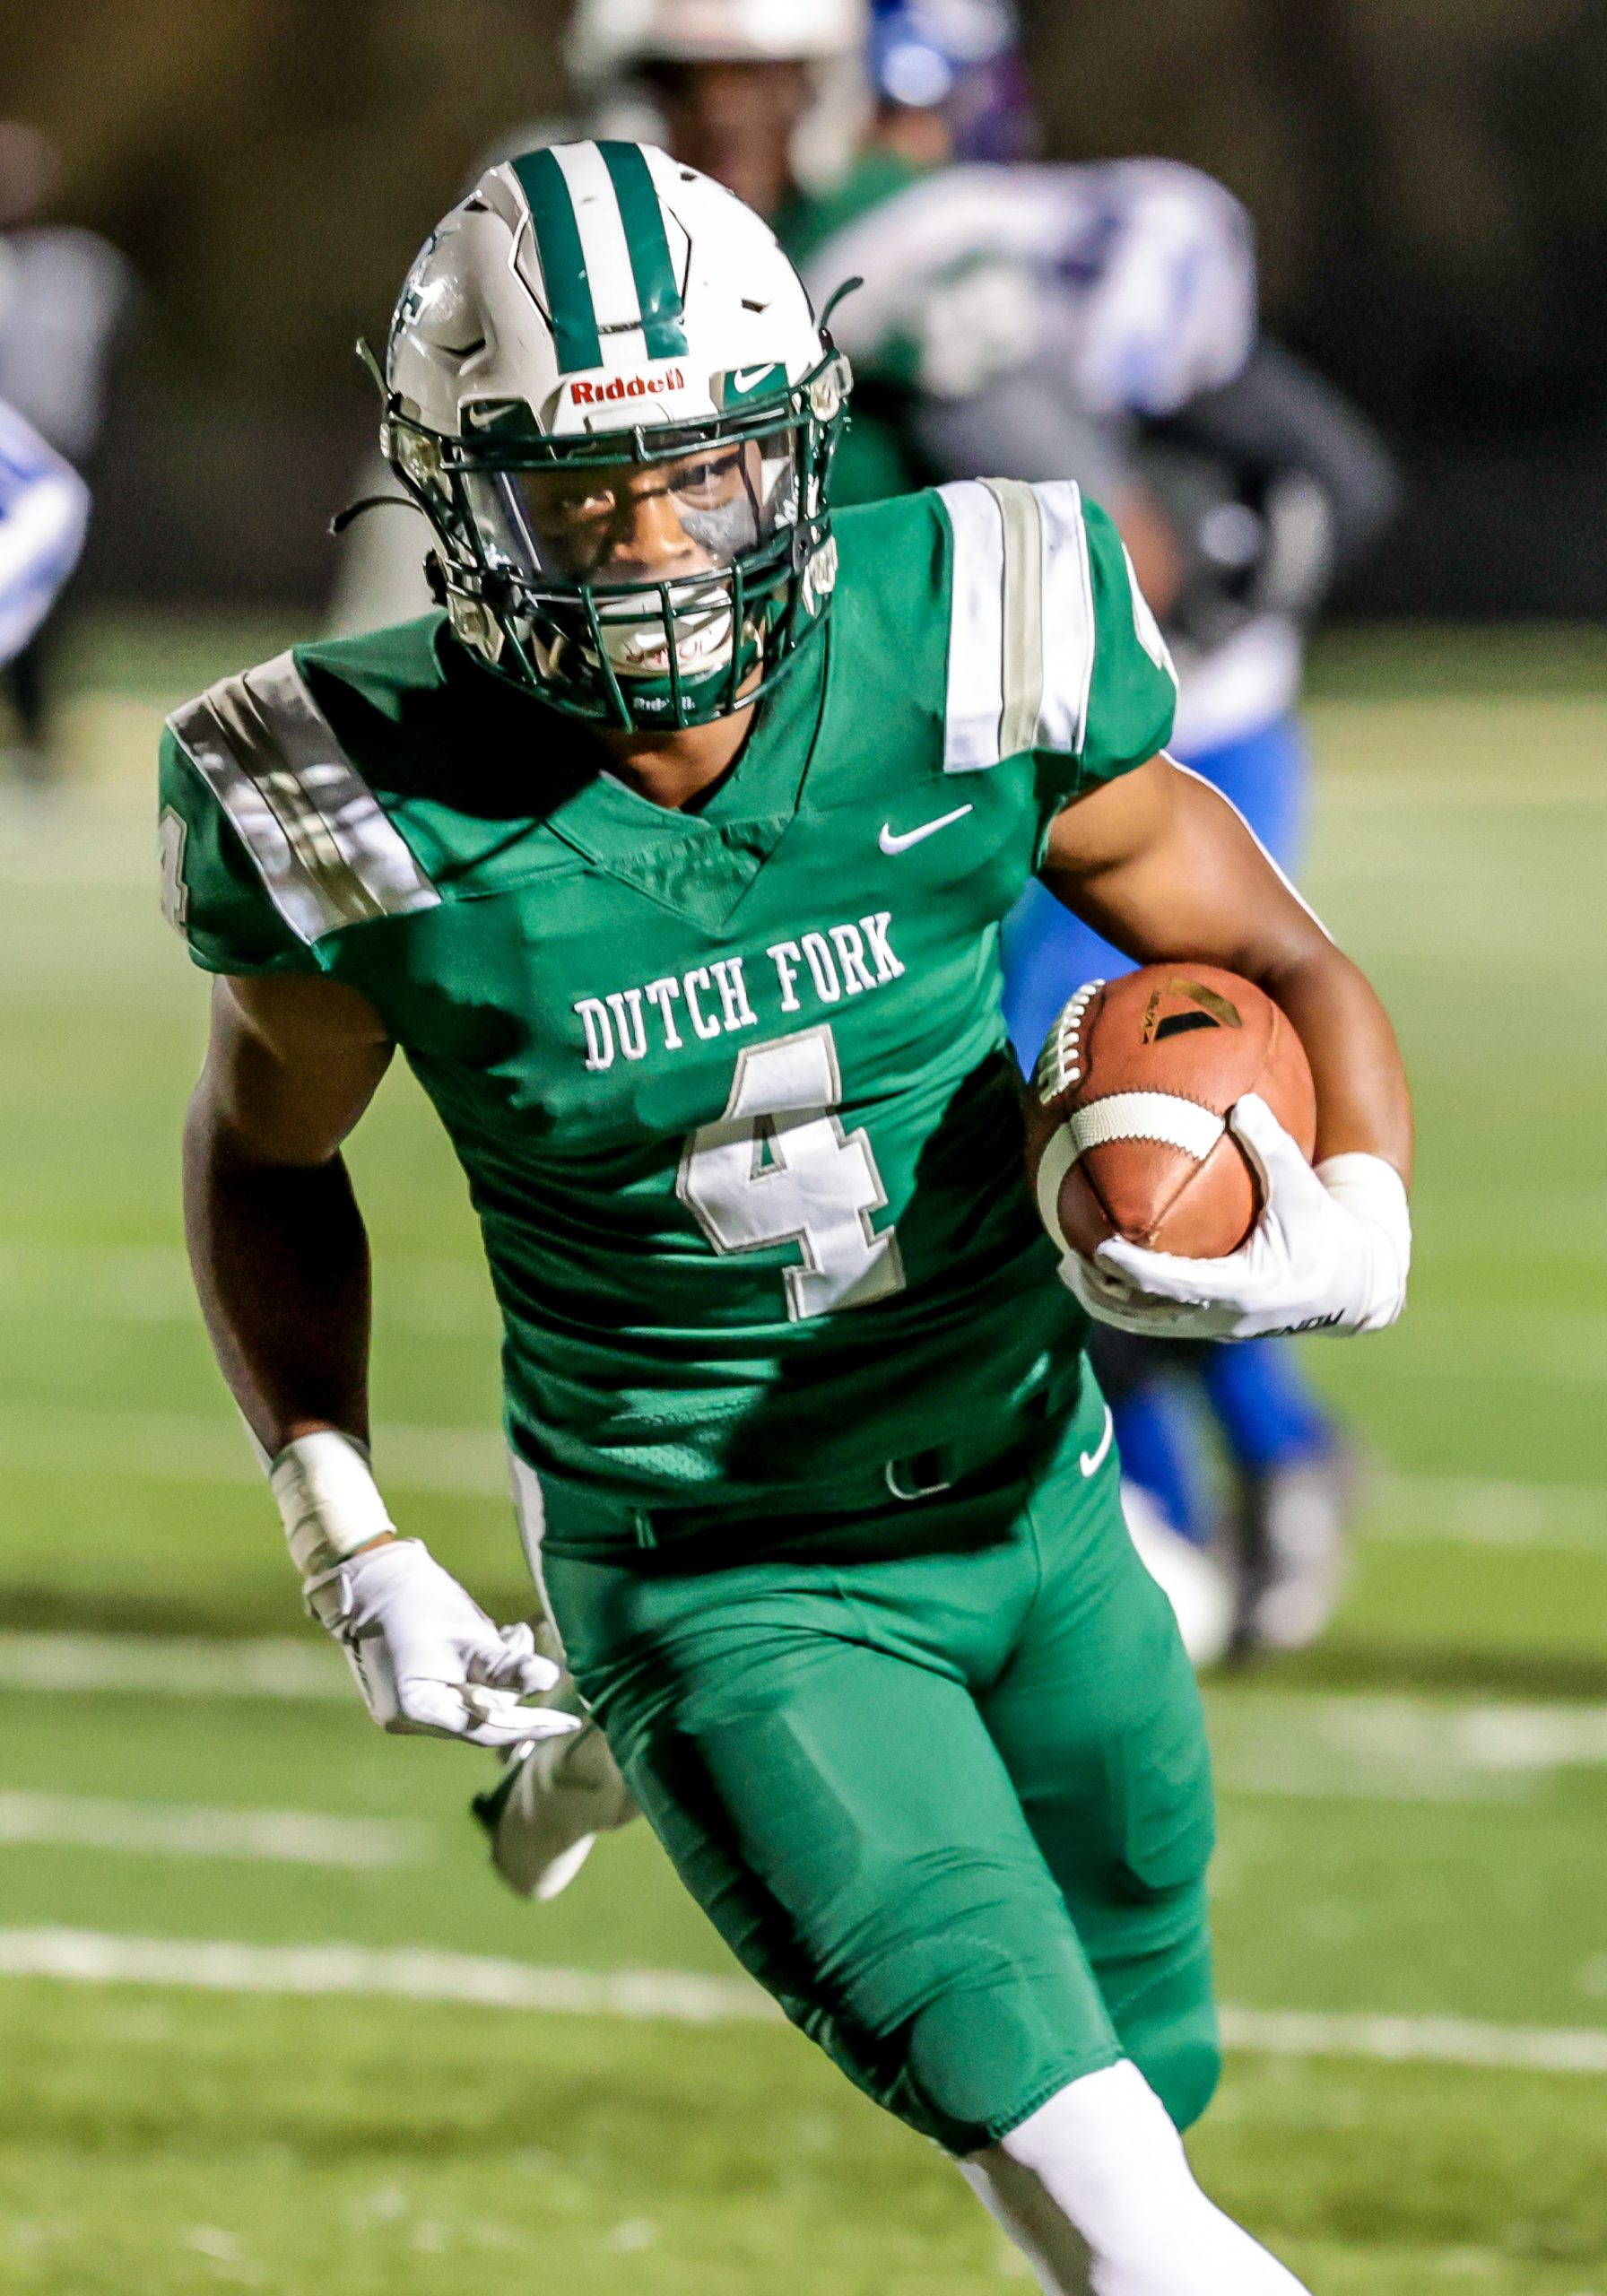 The Dutch Fork Silver Foxes had won five straight state championships and had an unbeaten streak of 62 games until their streak ended with a 22-19 loss to Gaffney in the state title game. Running Back Jarvis Green carries the ball for a first down. 